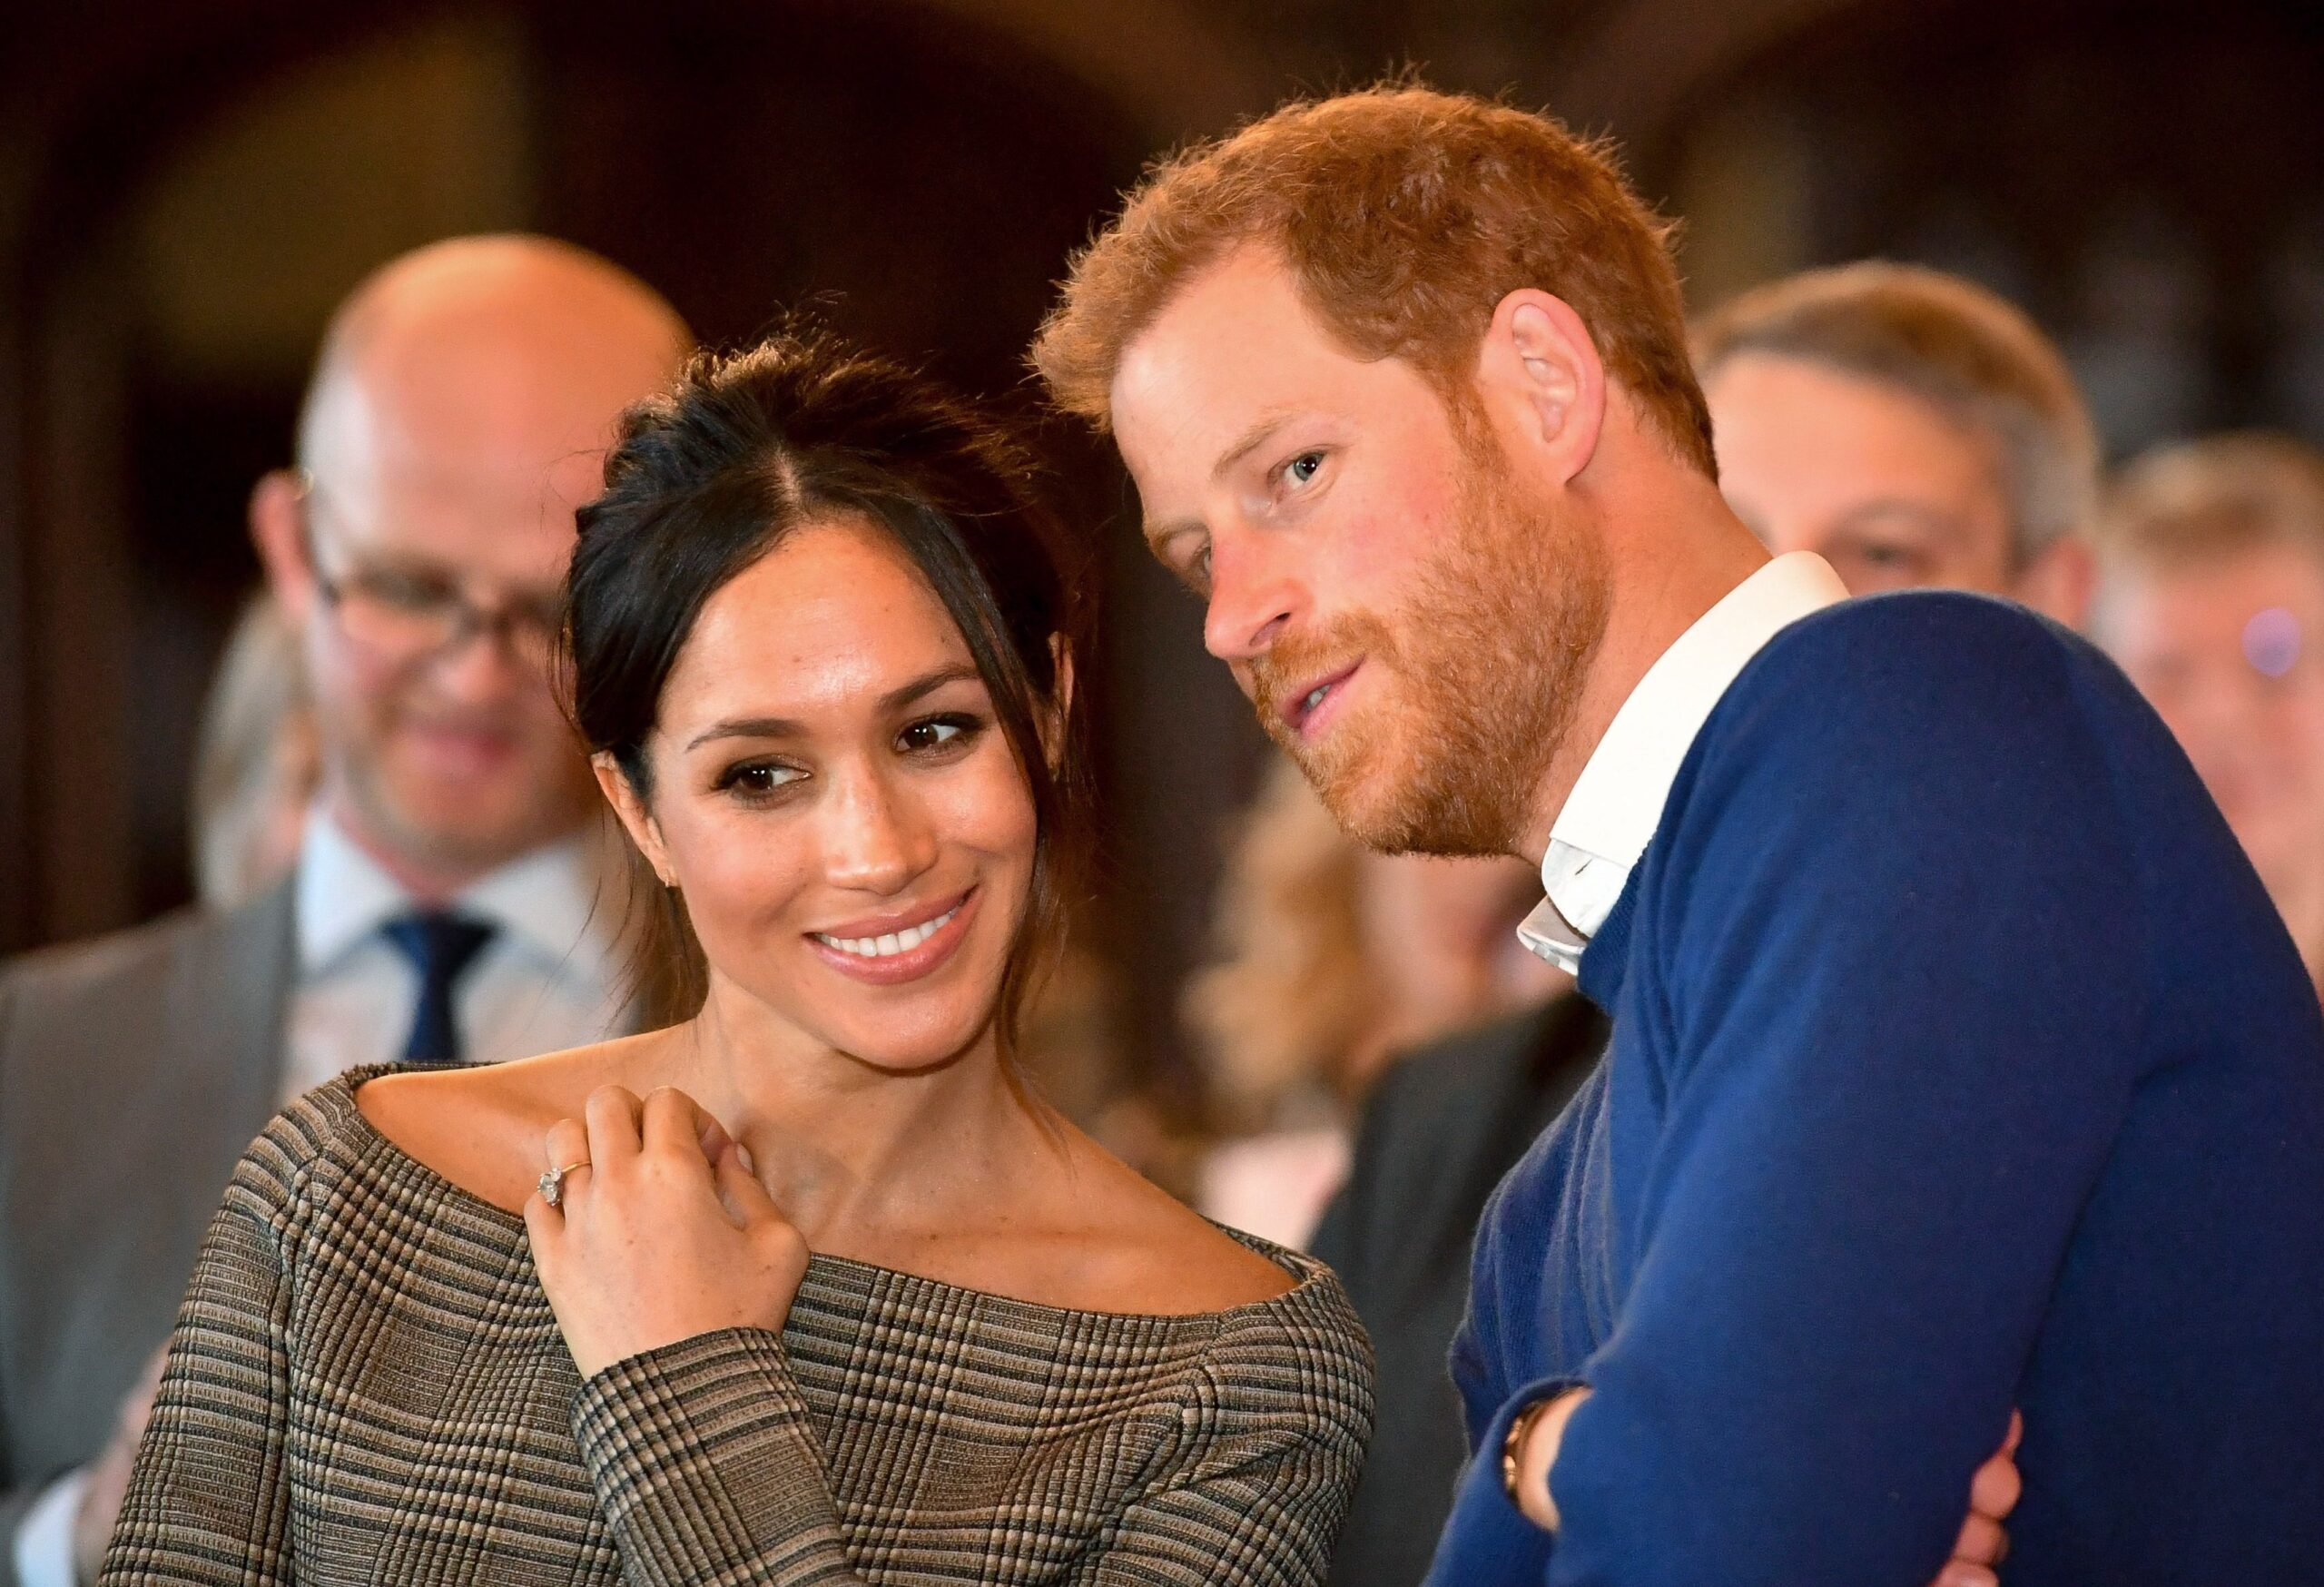 Meghan Markle Has Spoken Out About the struggle of Not Being Able to Afford Her $14m Home